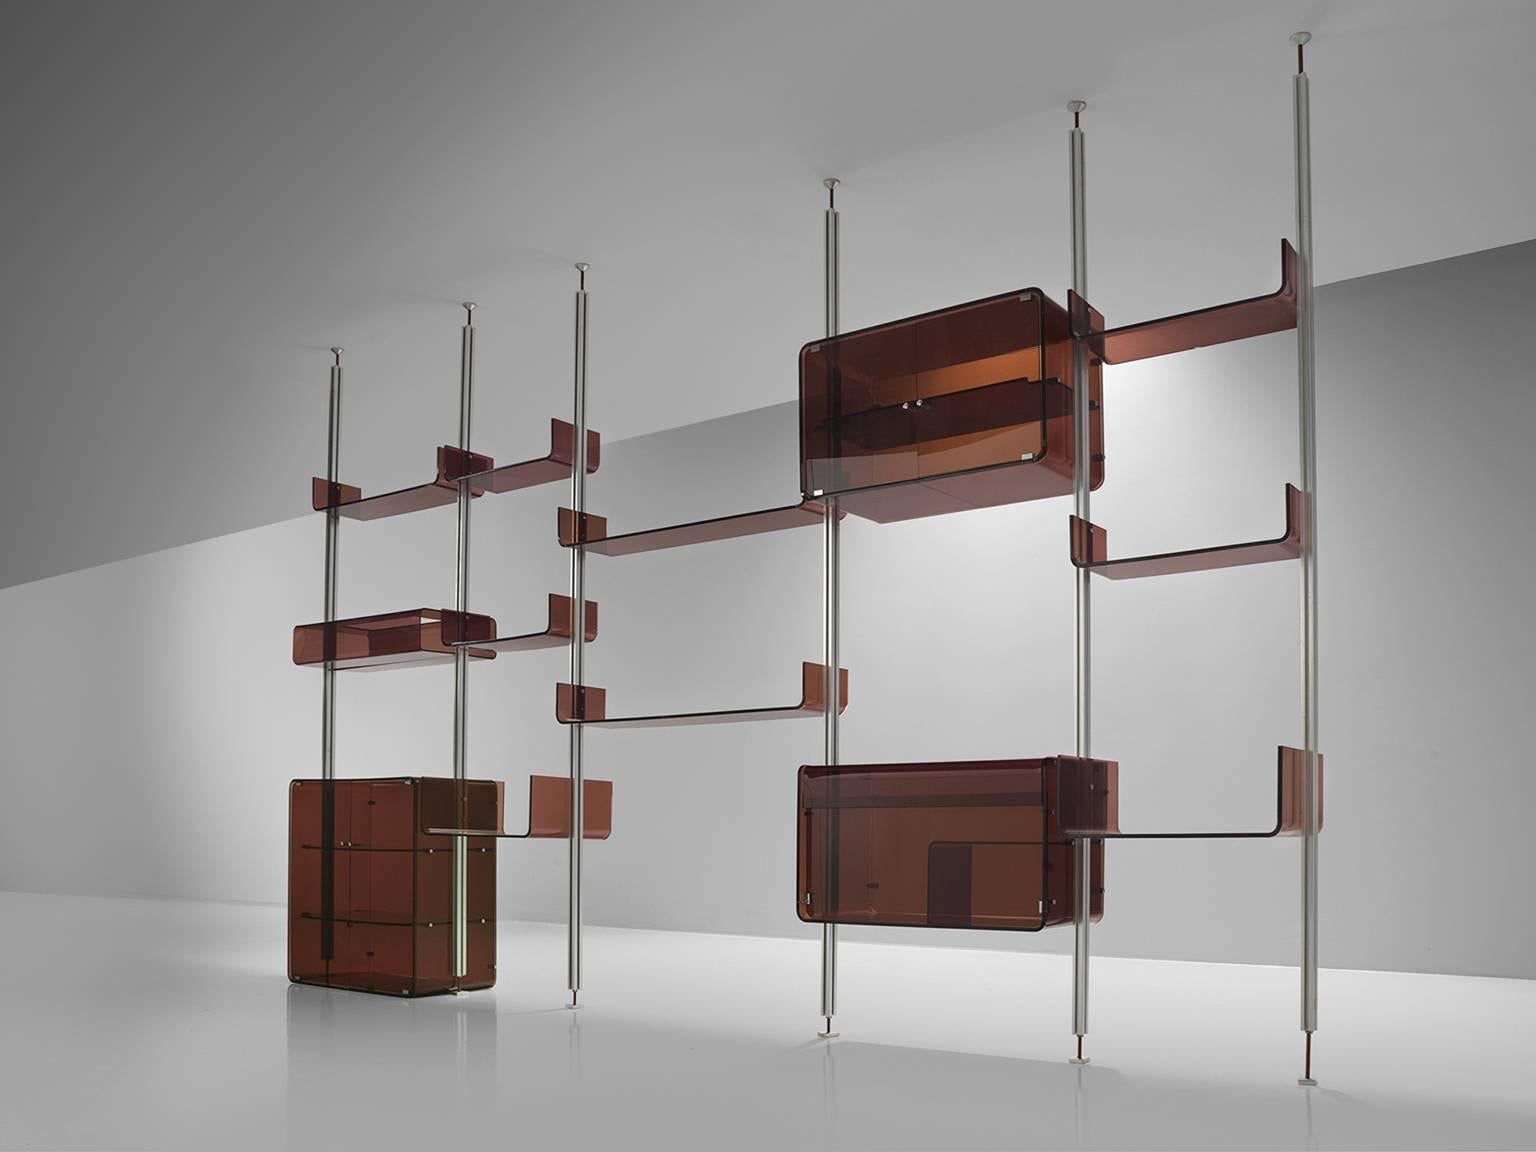 Michel Ducaroy for Roche Bobois, modular wall system, in brown plexiglass and aluminum, France, 1970s.

These freestanding shelves by French manufacturer Roche Bobois are part of the midcentury design collection. This bookcase consists of five